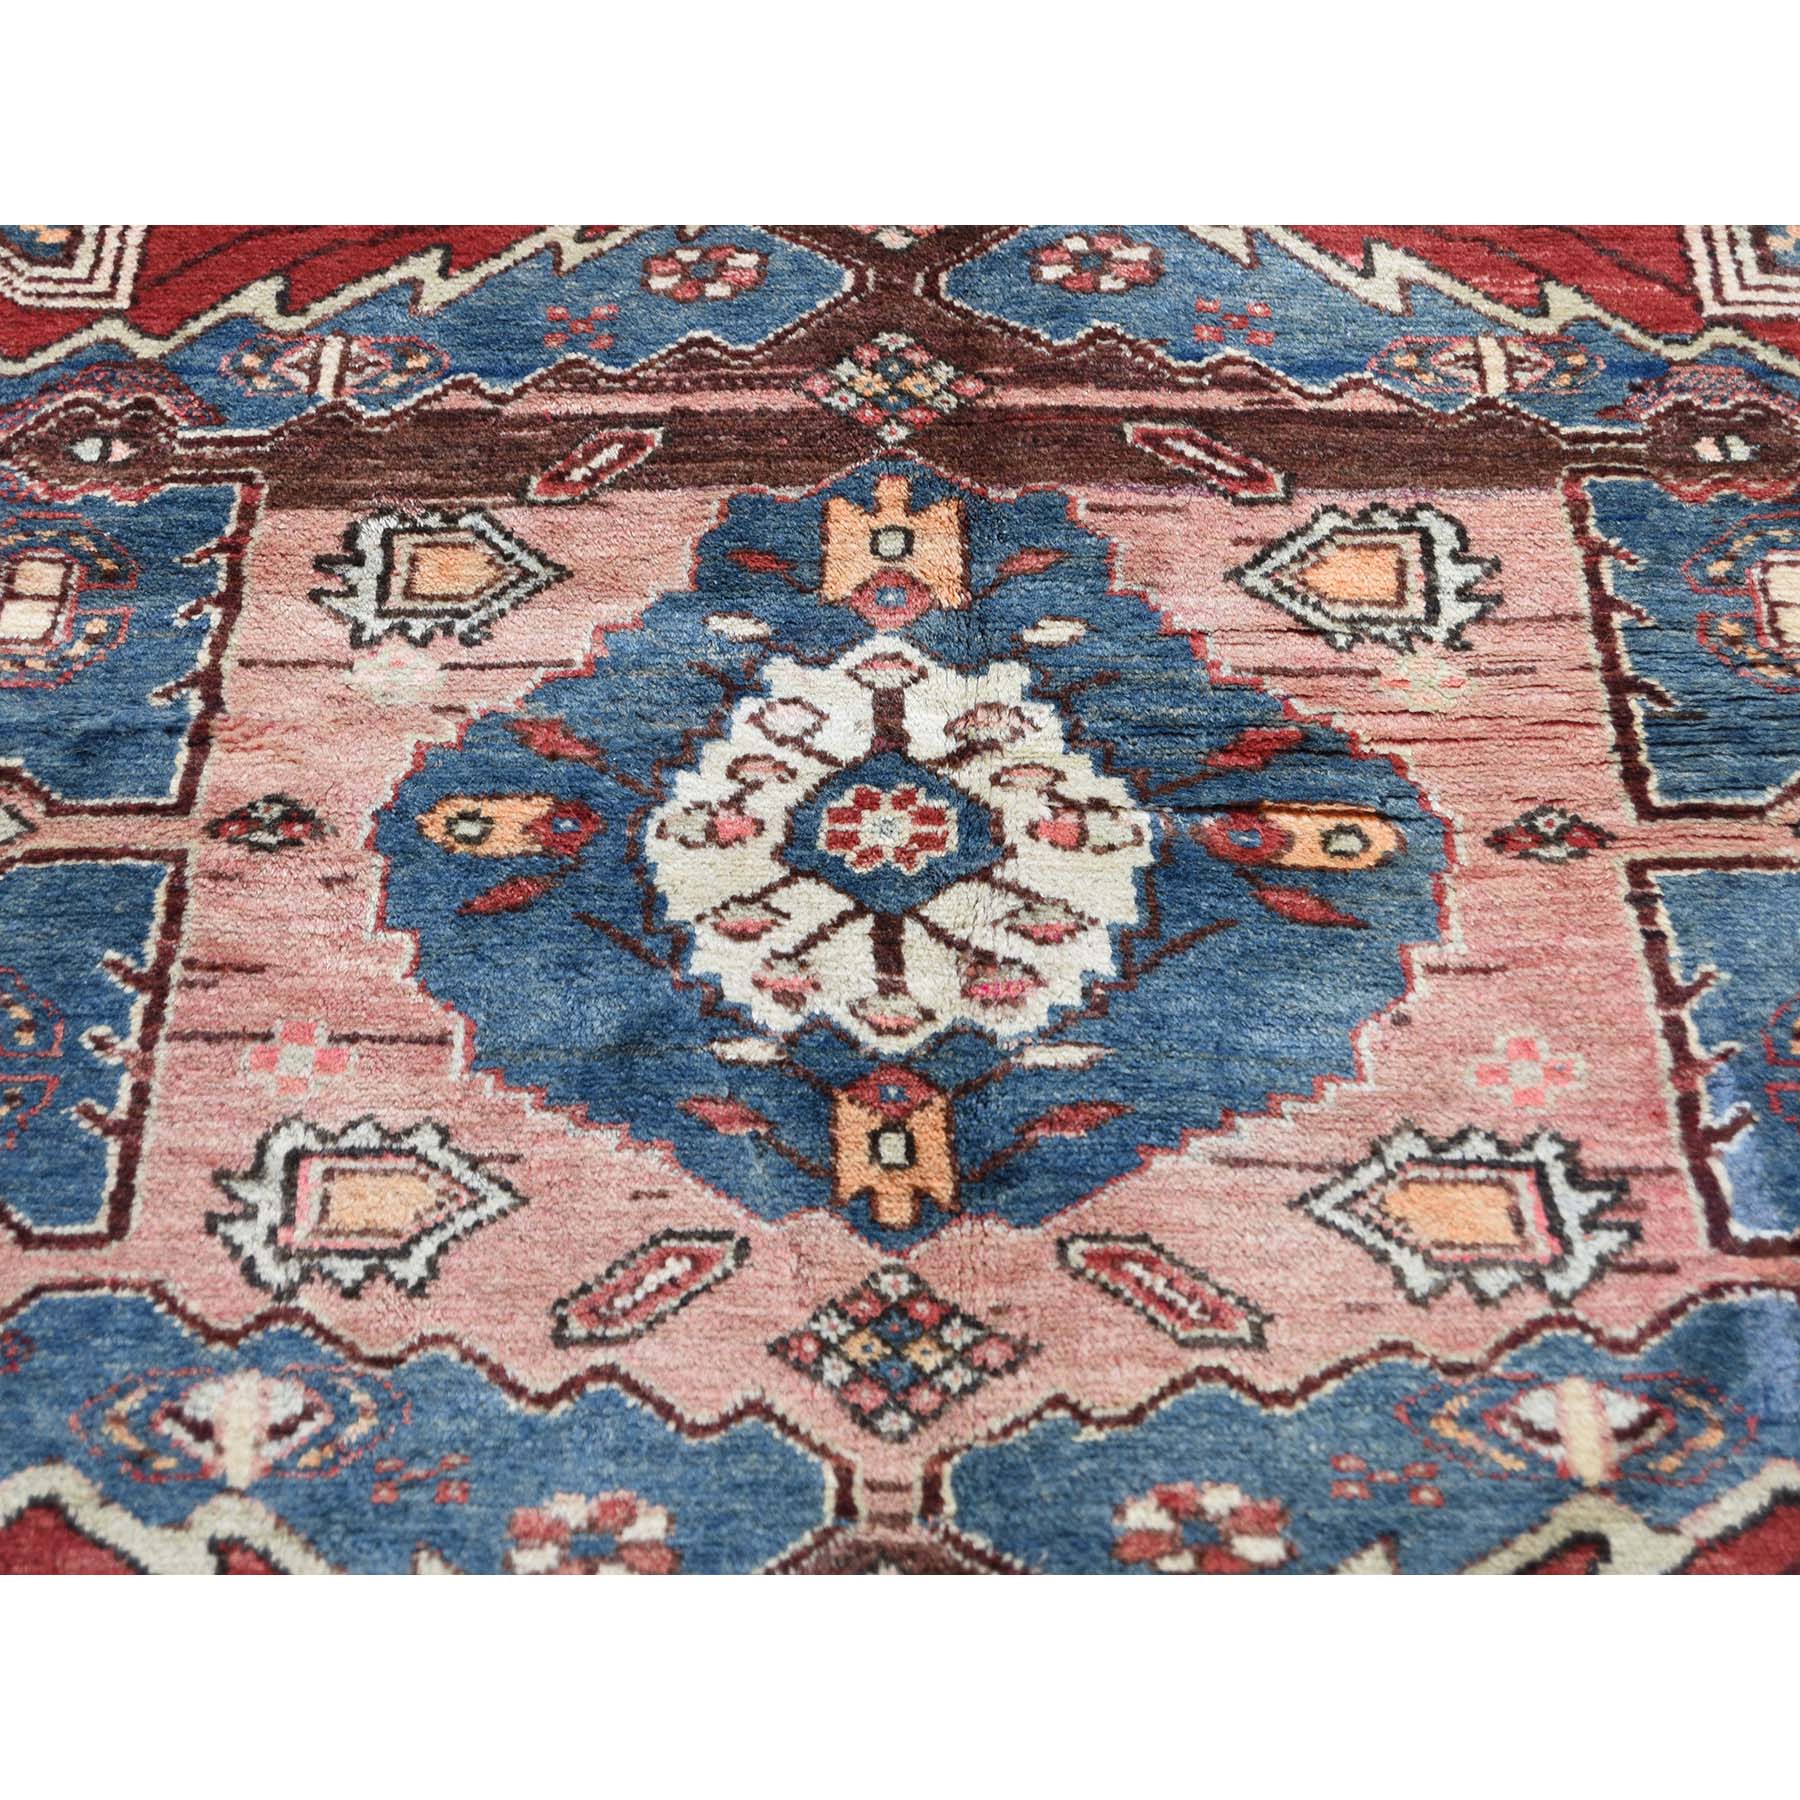 4-10 x7-6  Unused Persian Afshar  Pure Wool Hand-Knotted Oriental Rug 